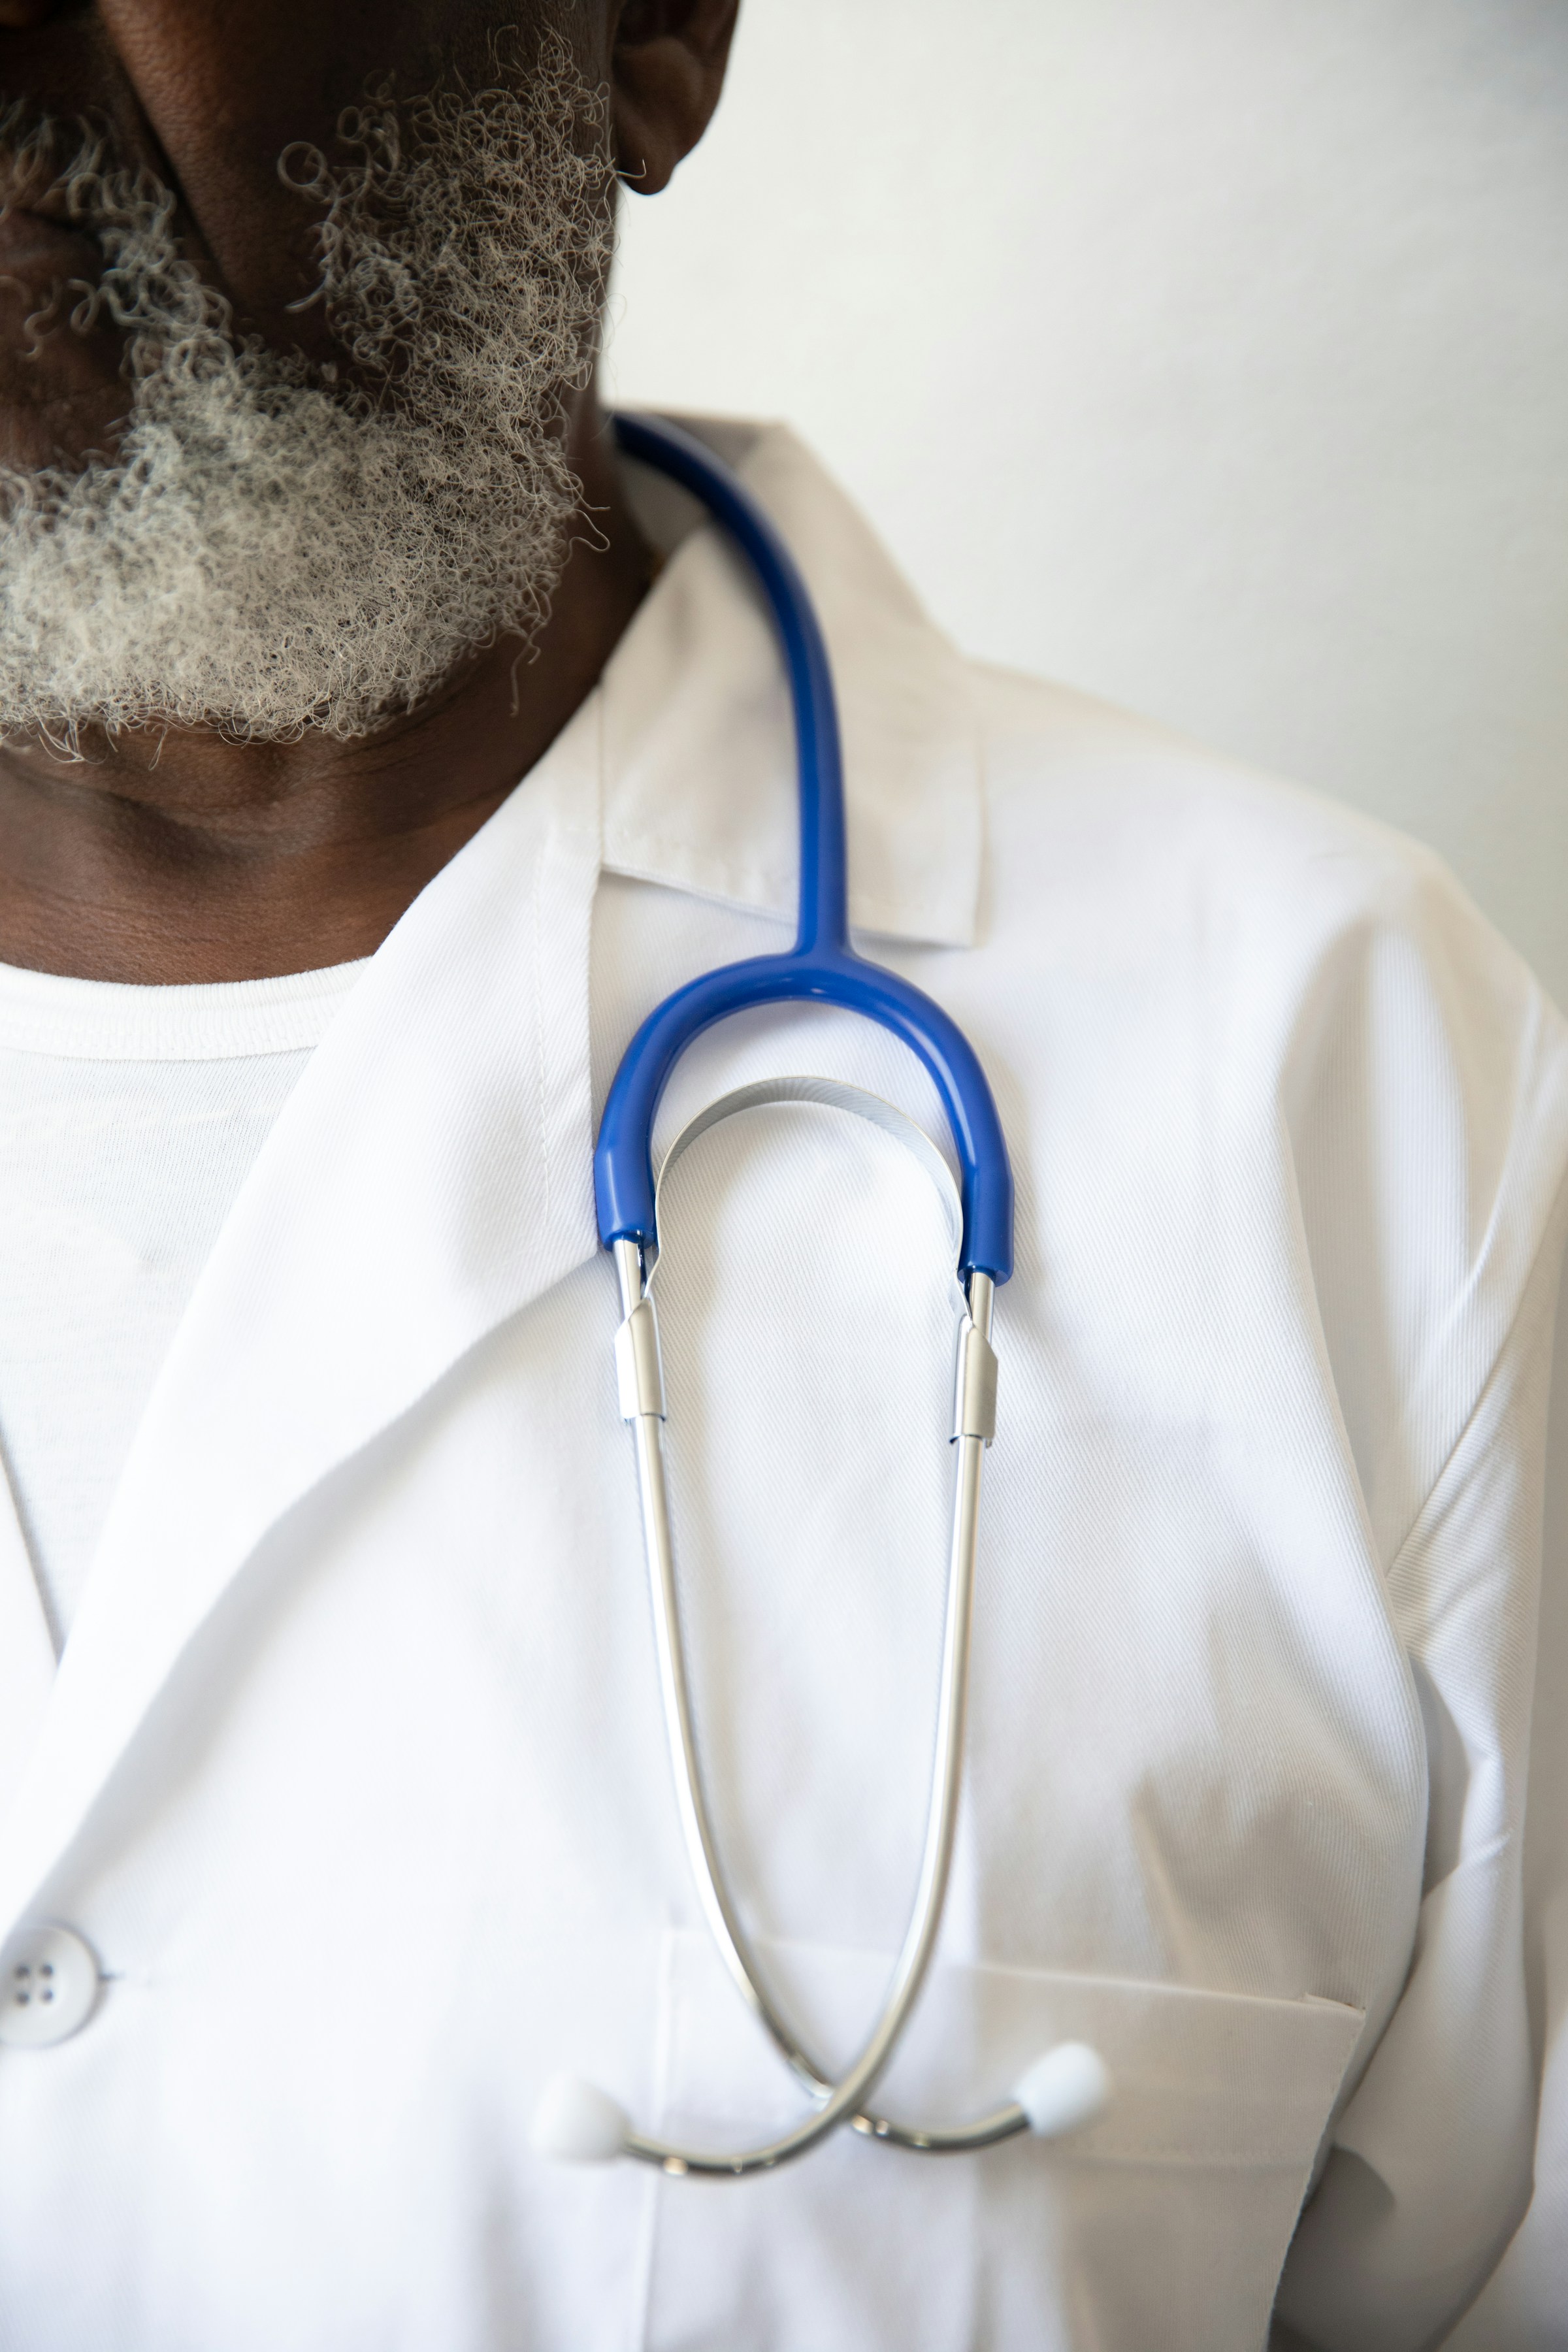 A doctor with a stethoscope around his neck | Source: Unsplash